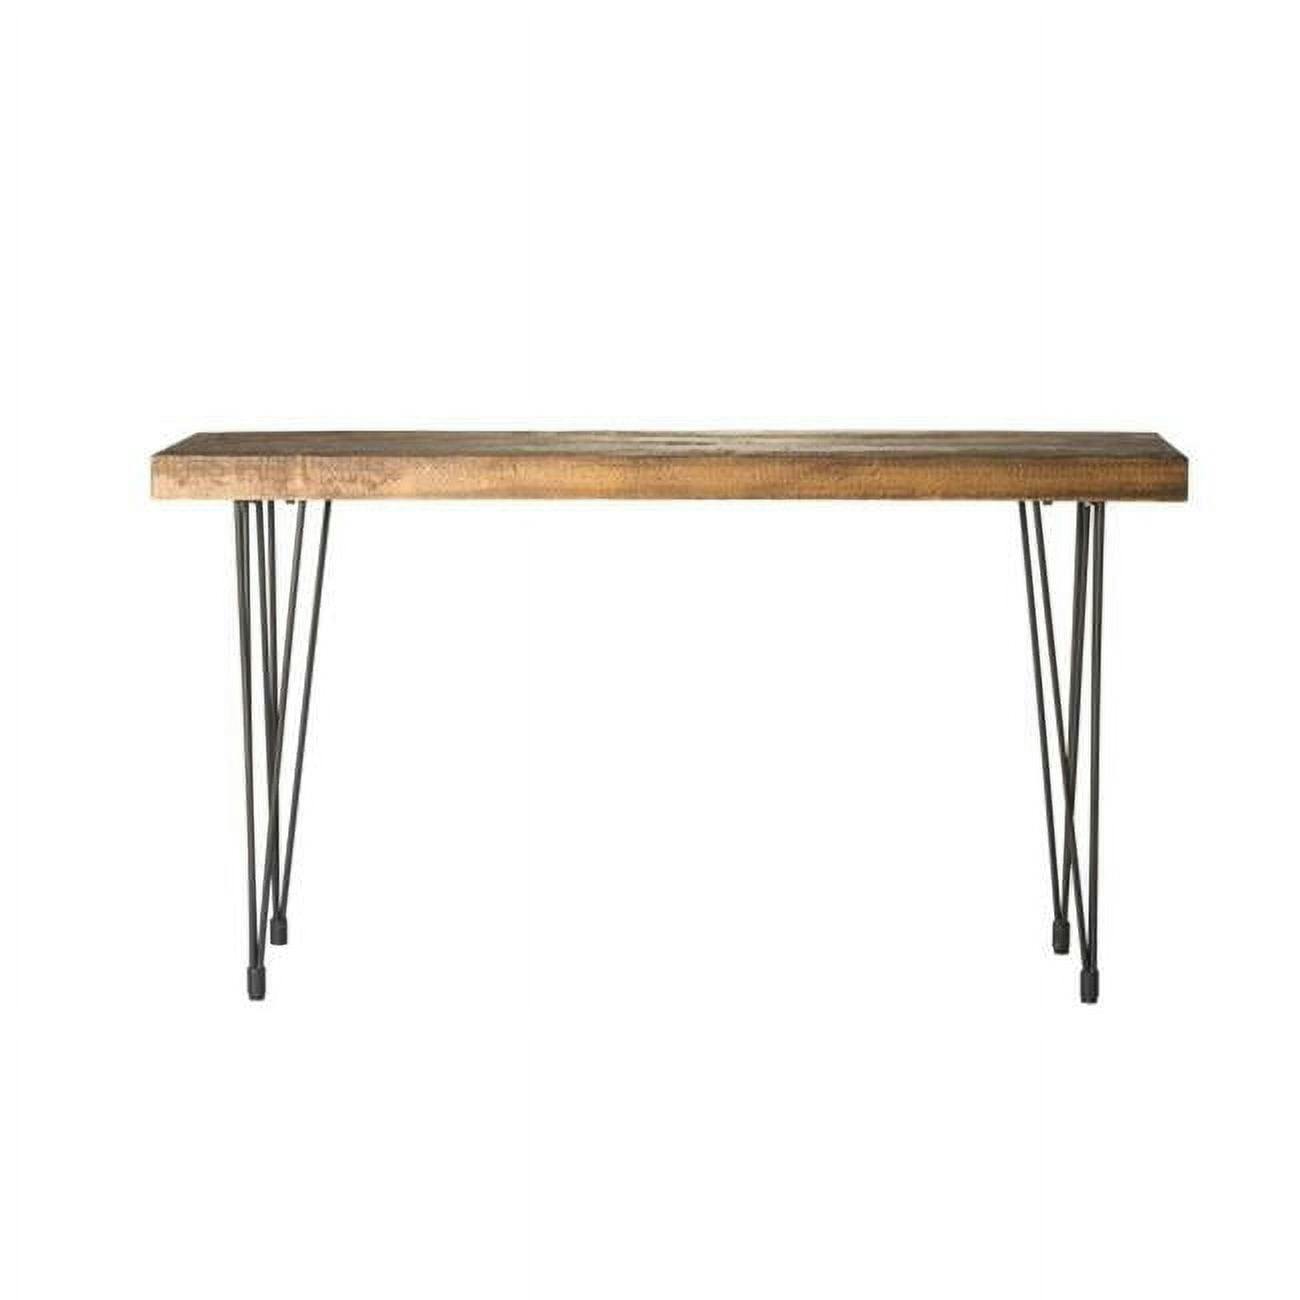 Boneta Rustic Industrial Brown Console Table with Iron Legs